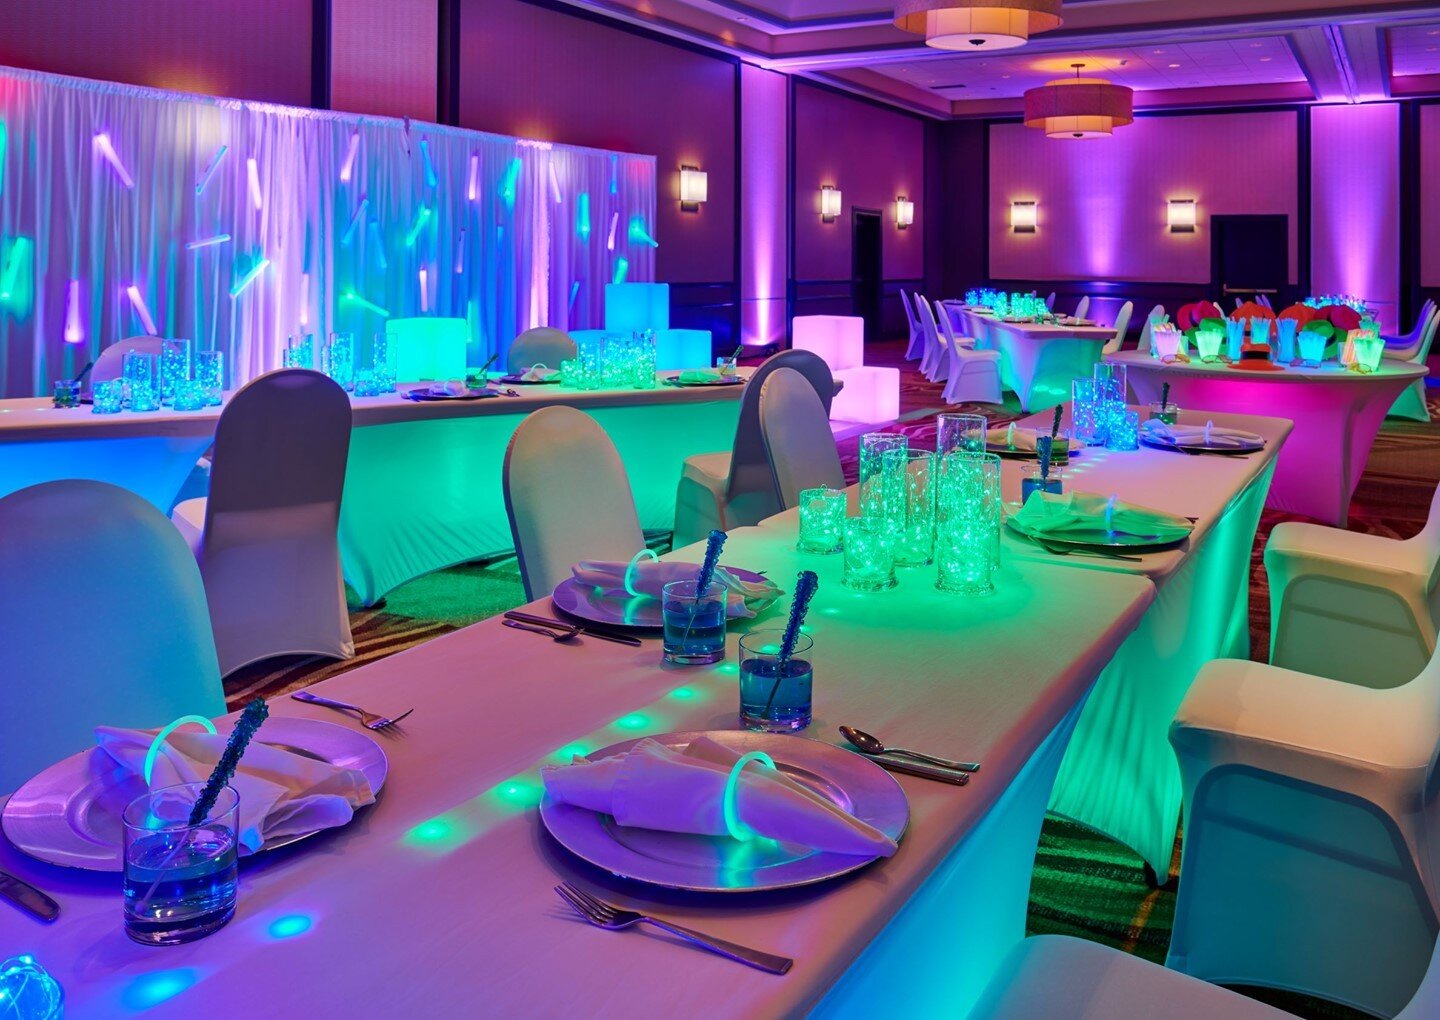 Neon Glow Parties are timeless! Plan your teens Mitzvah with us today and ask about our Mitzvah Menu &amp; Package options ✨
&bull;
&bull;
&bull;
&bull;
&bull;
&bull;
&bull;
&bull;
#barmitzvah #batmitzvah #bnaimitzvah r  #mazeltov #milwaukeemitzvah #